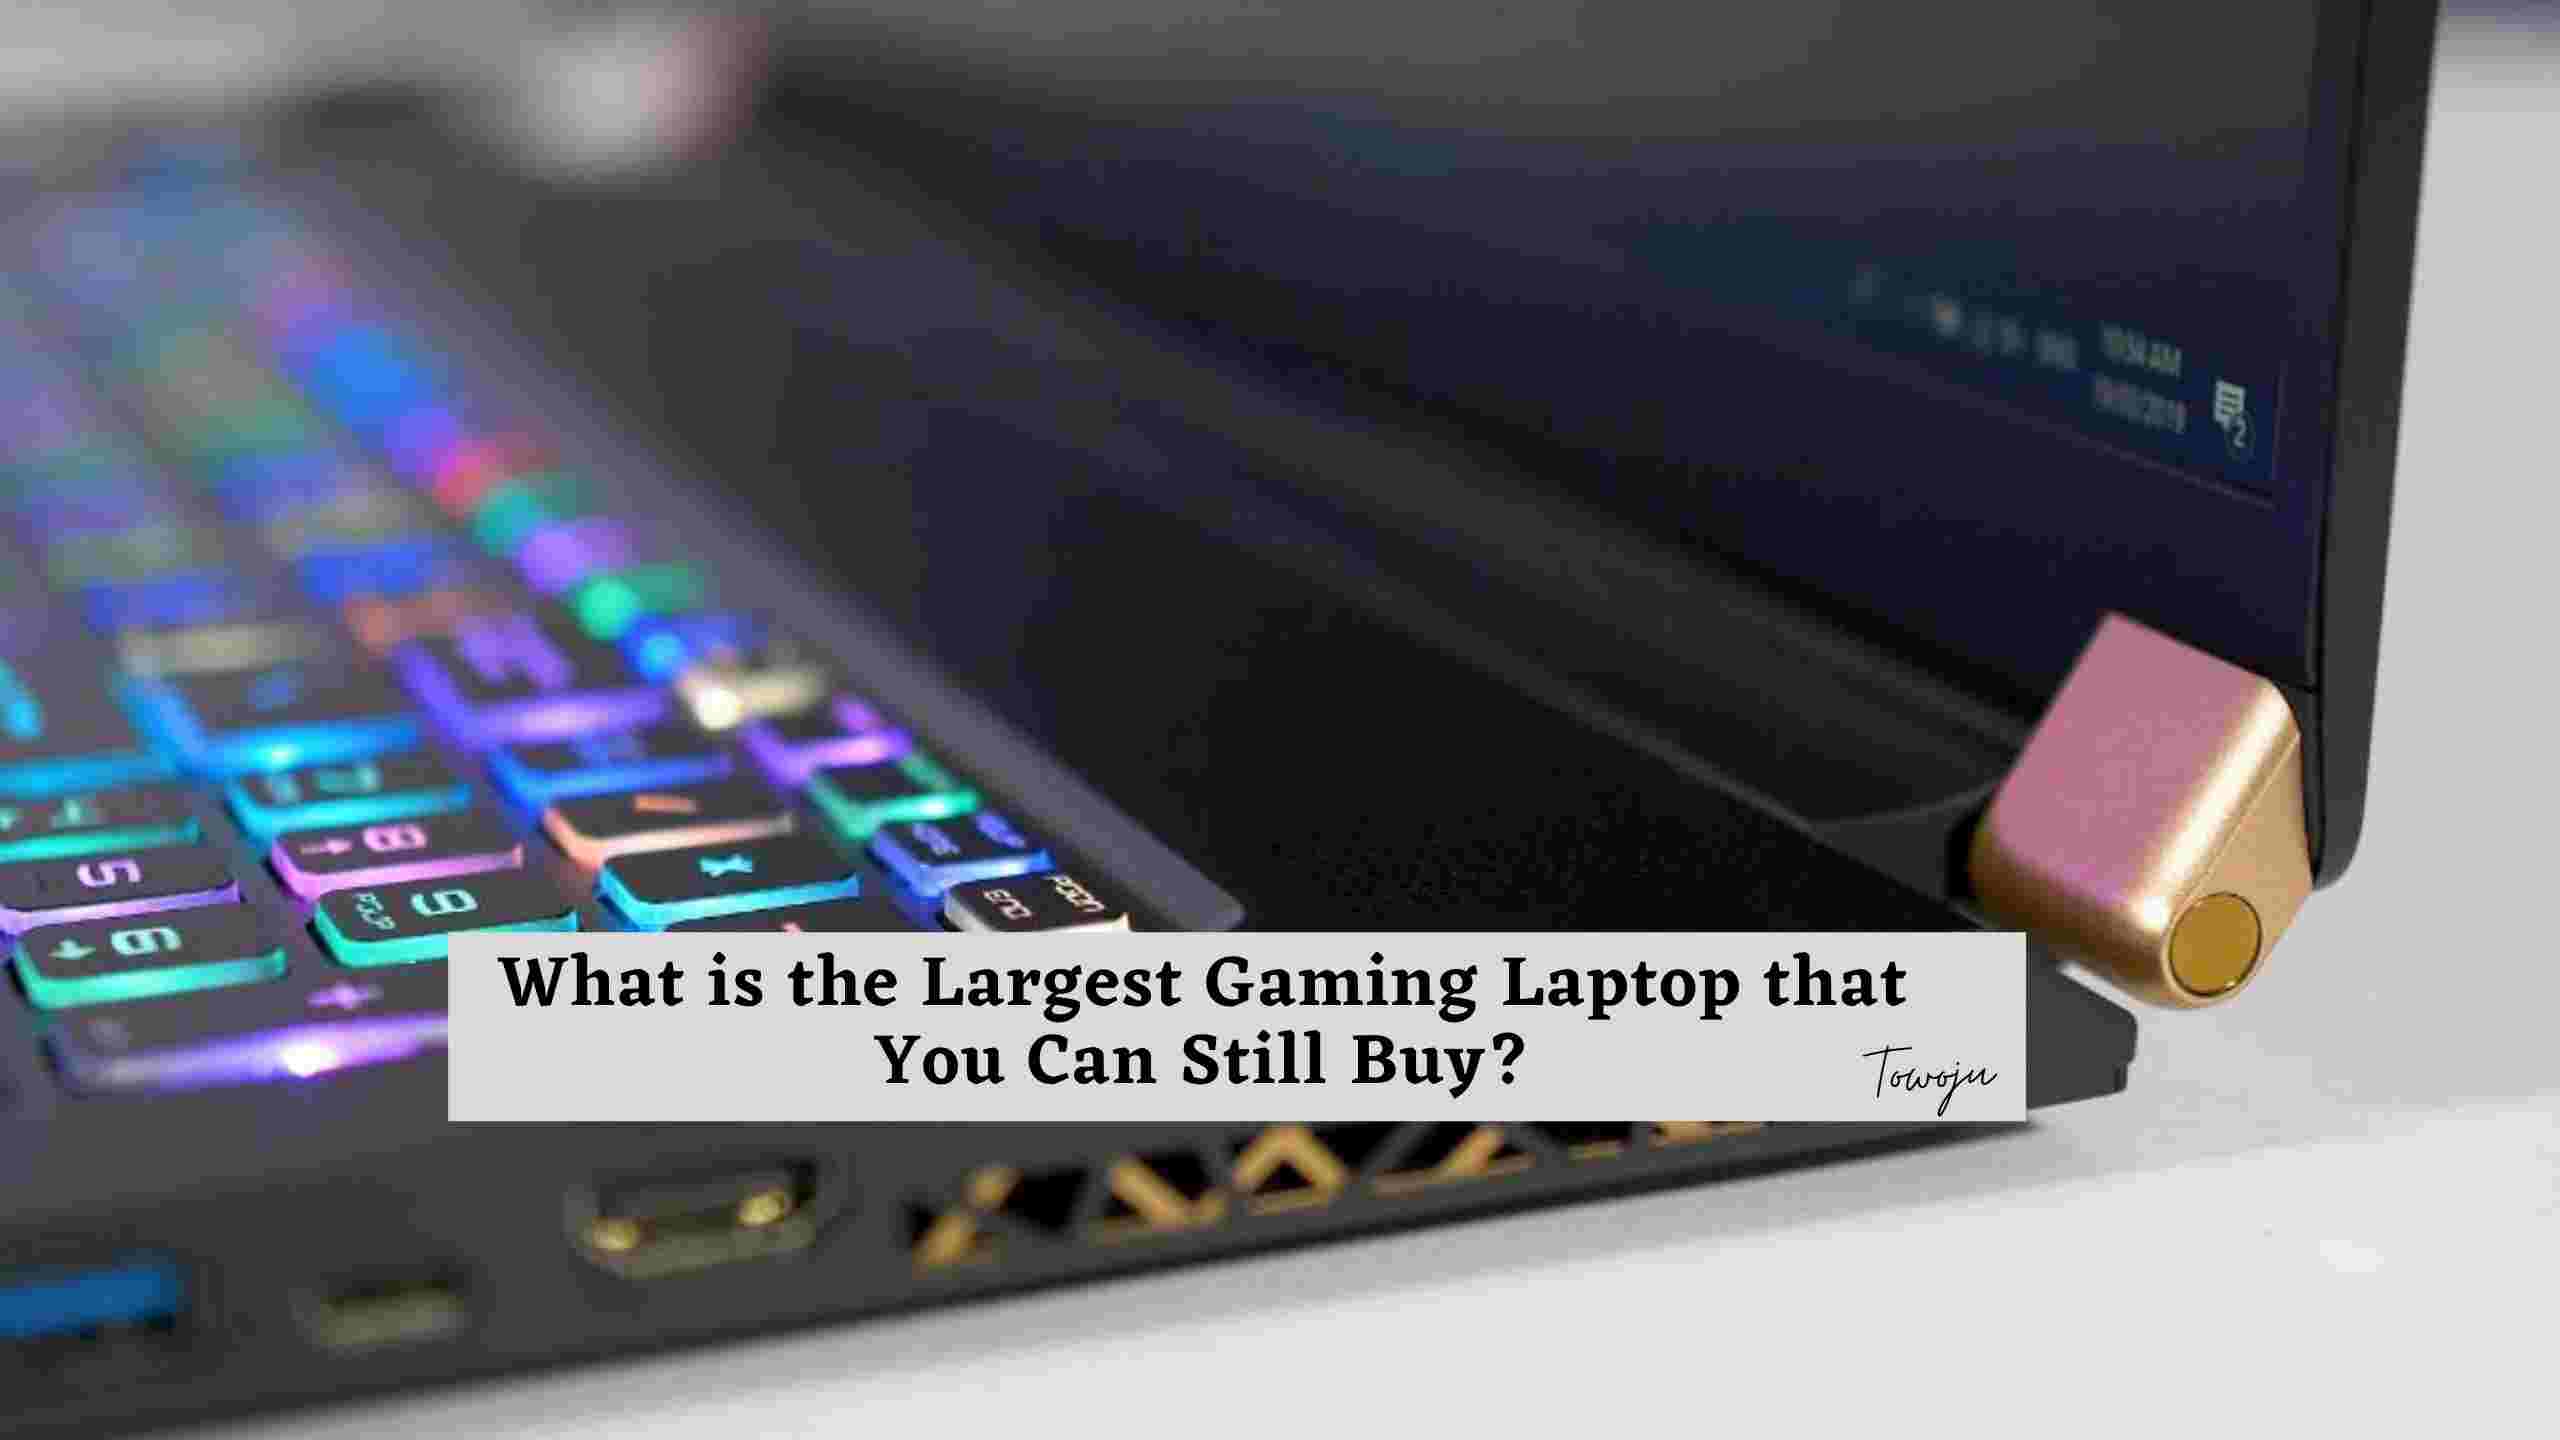 What is the Largest Gaming Laptop that You Can Still Buy?